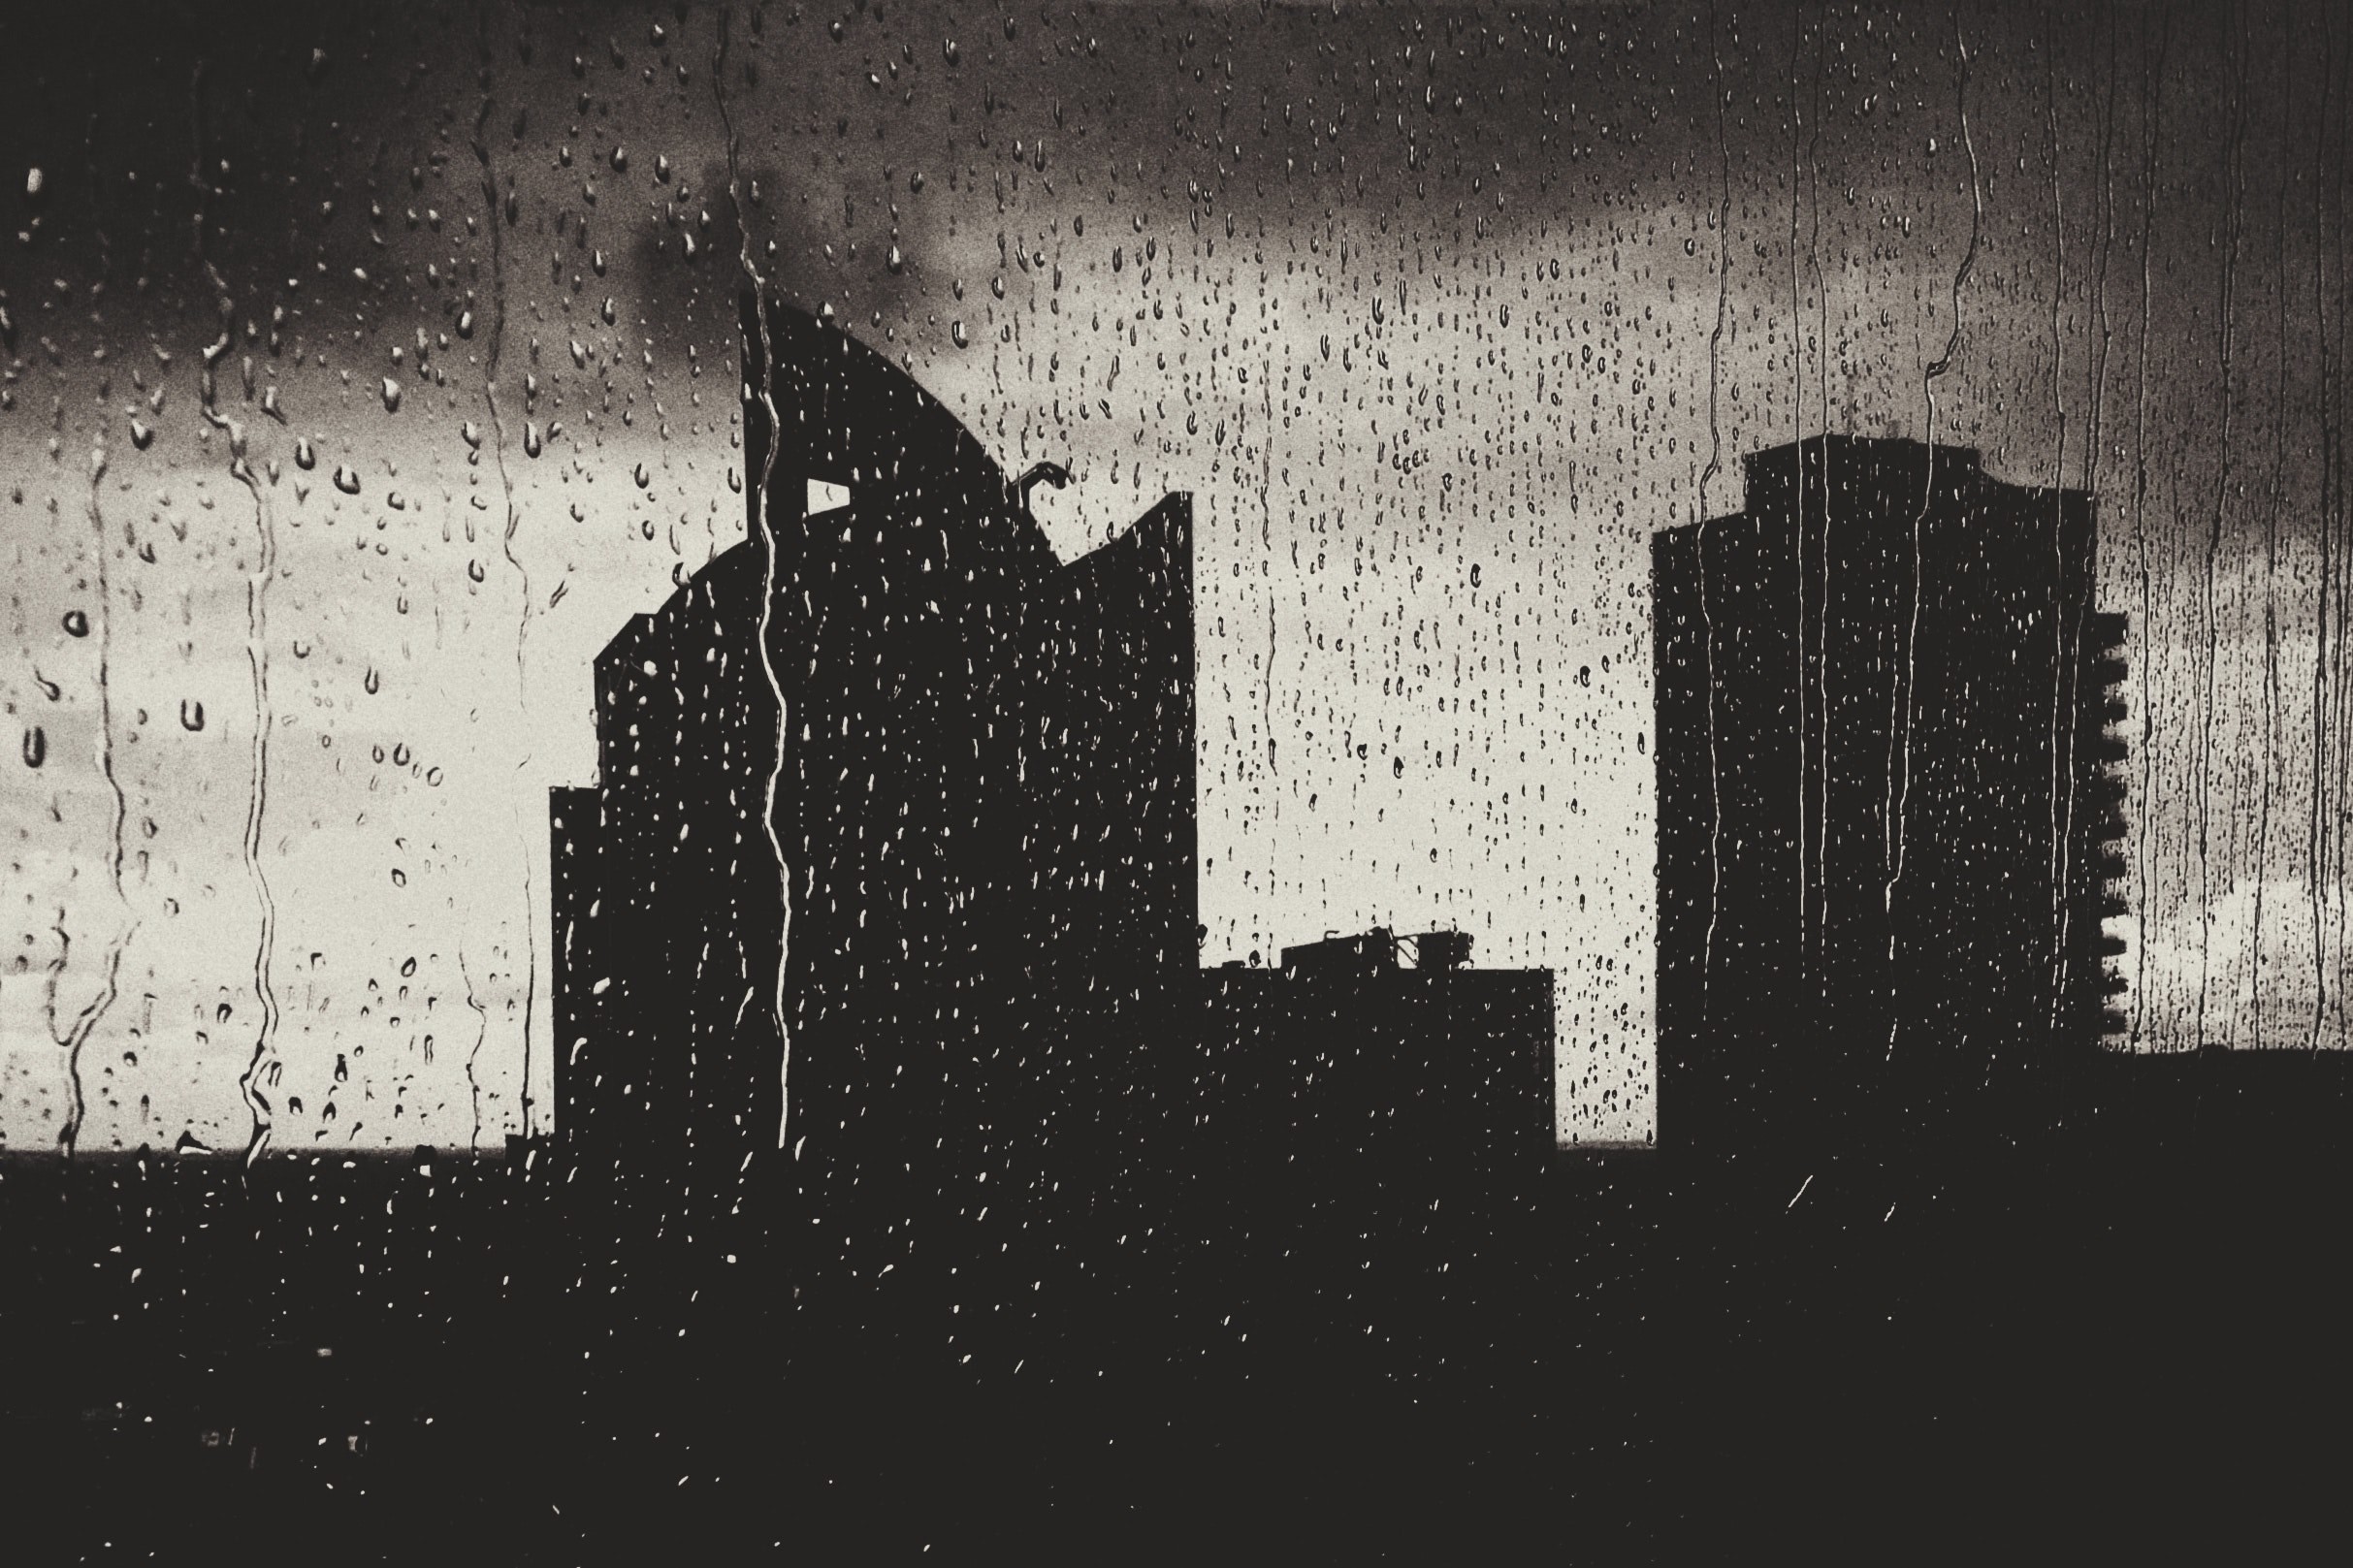 2426x1617 # rain window silhouette and city hd wallpaper and background  #27143